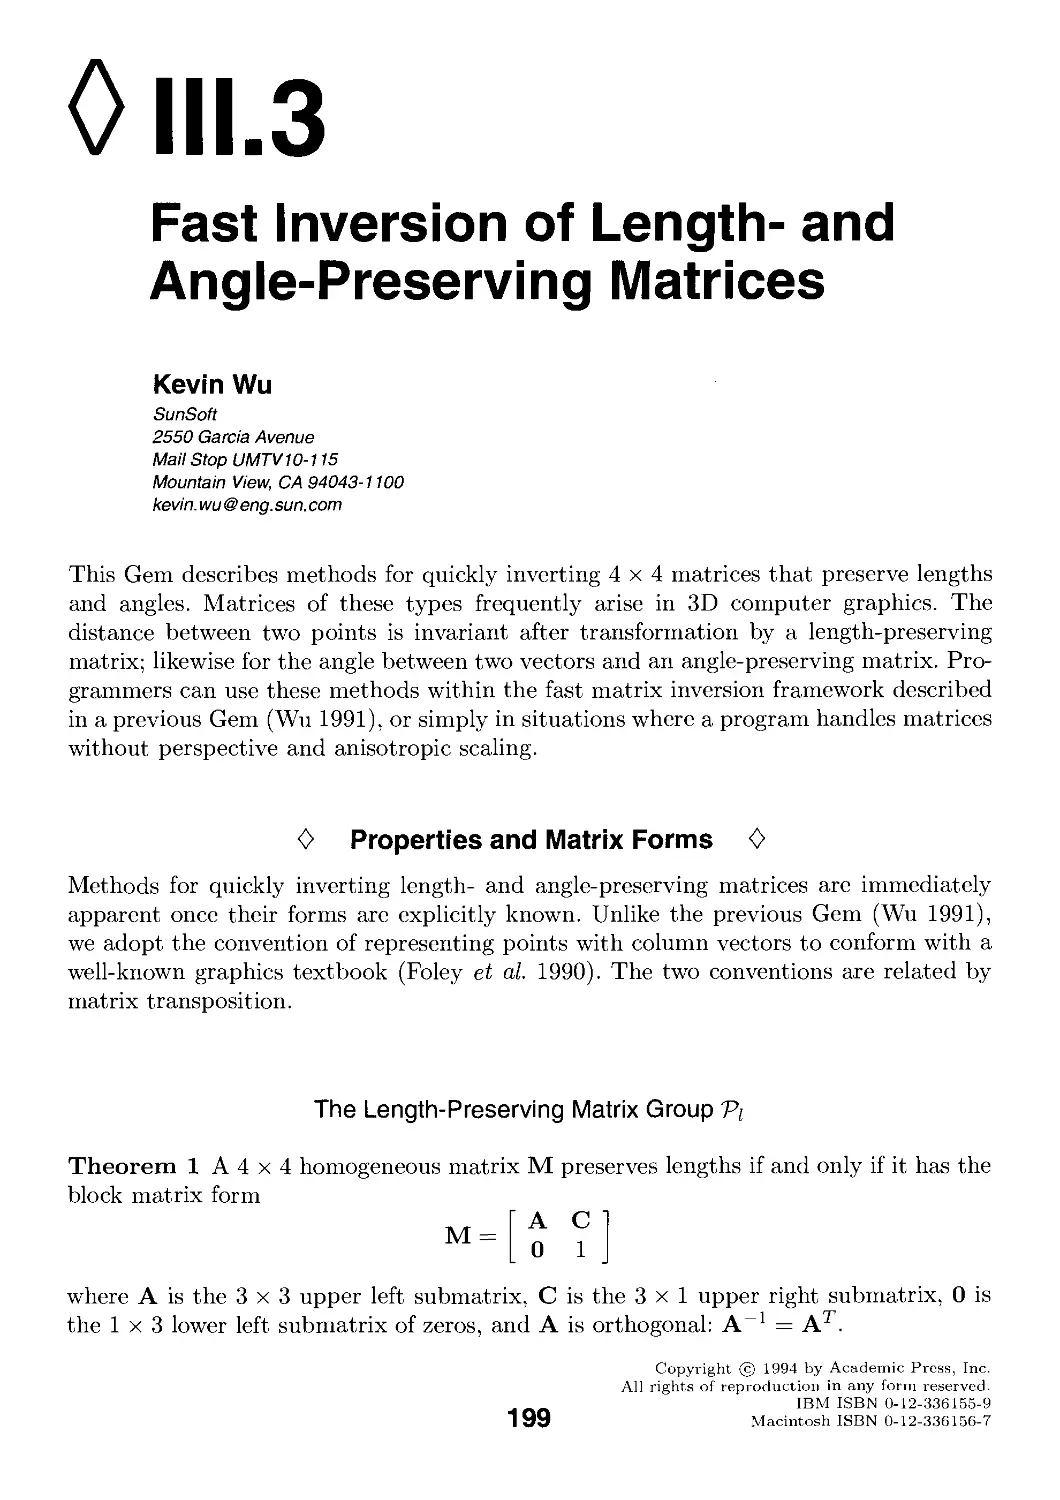 III.3. Fast Inversion of Length- and Angle-Preserving Matrices by Kevin Wu